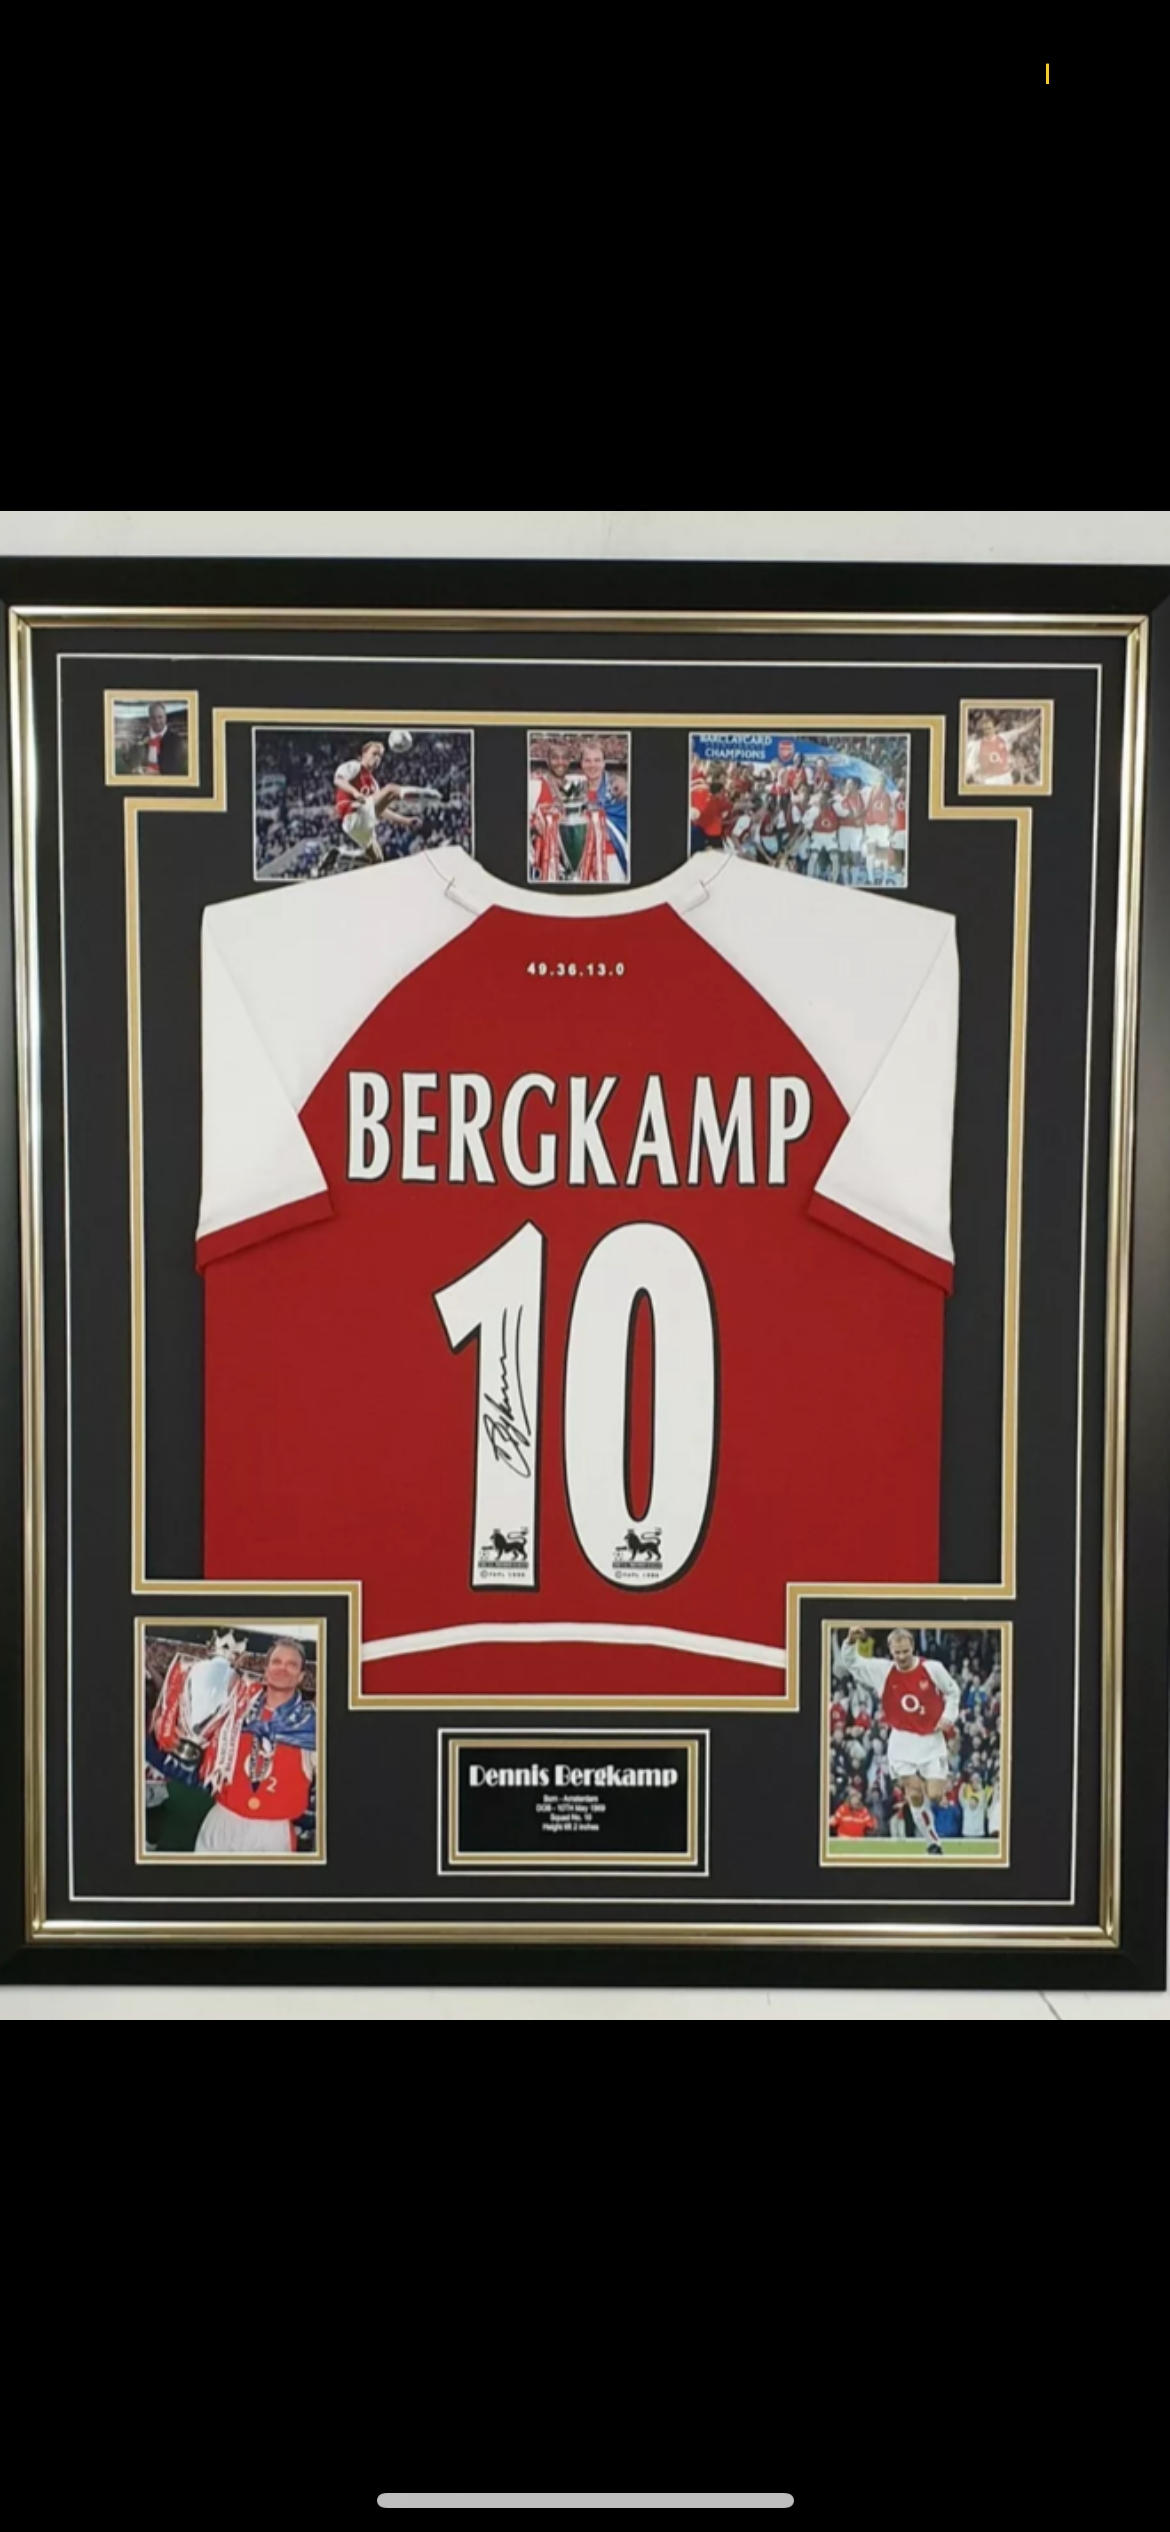 Wright and bergkamp frames inc shipping